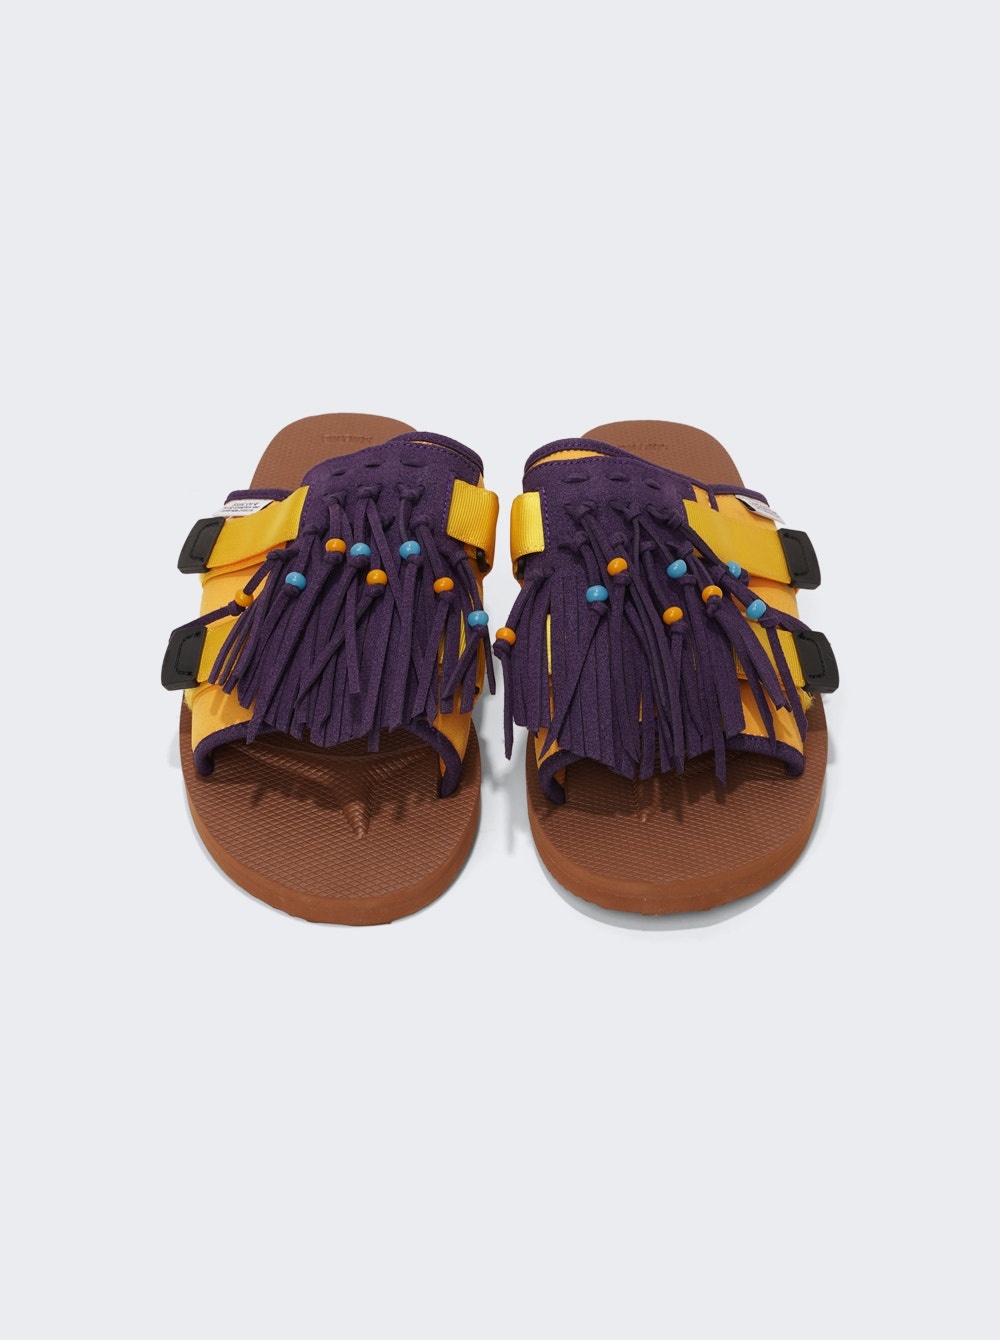 HOTO-Cab Sandals Yellow and Brown